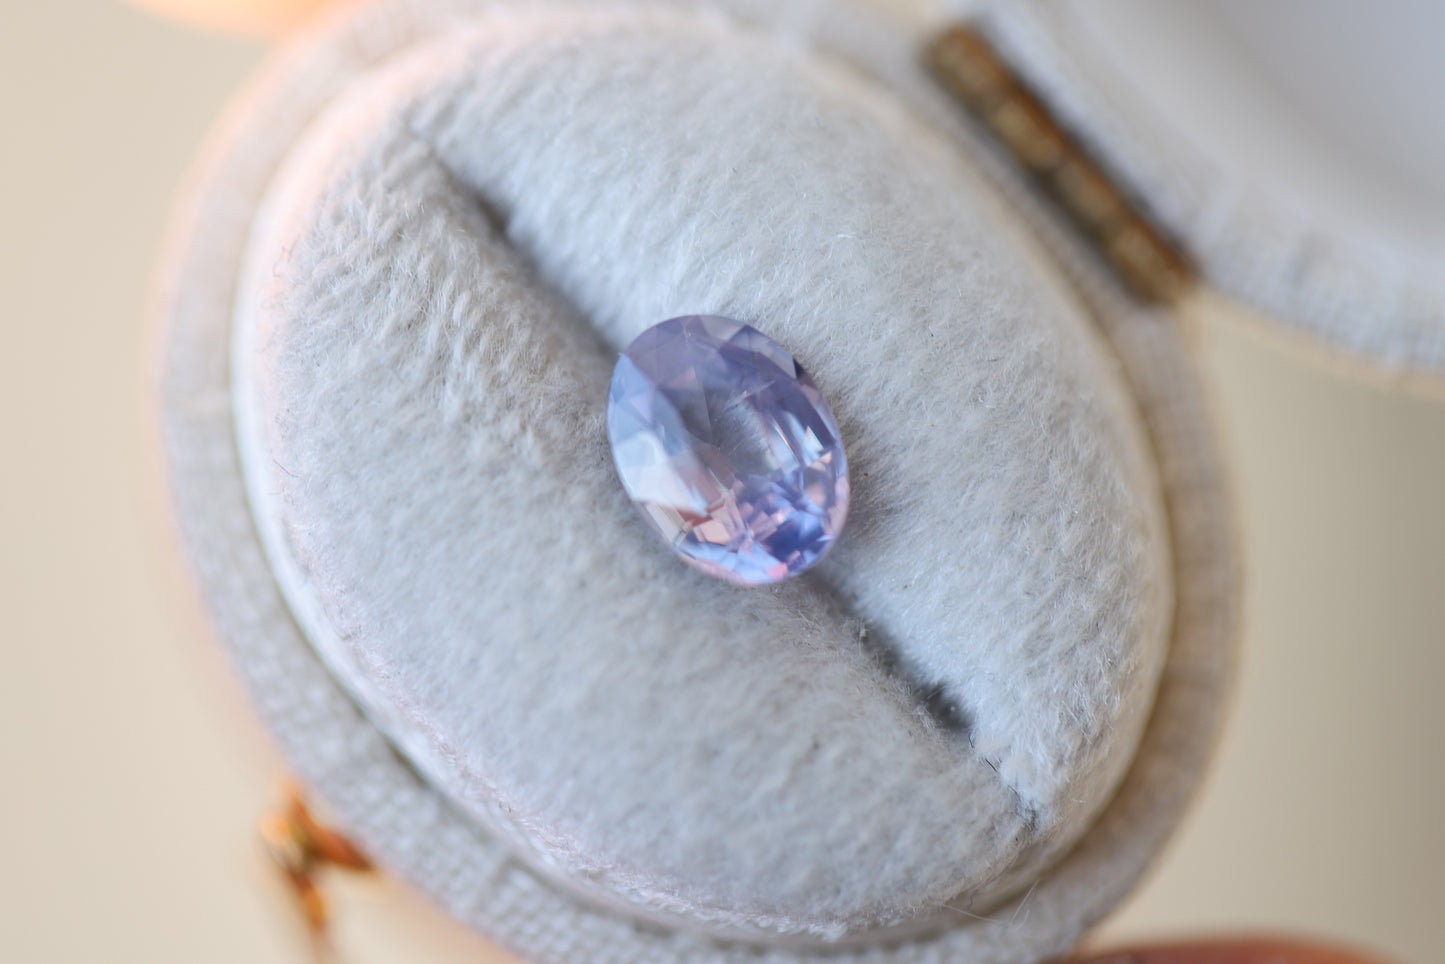 1.55ct oval opalescent lavender sapphire